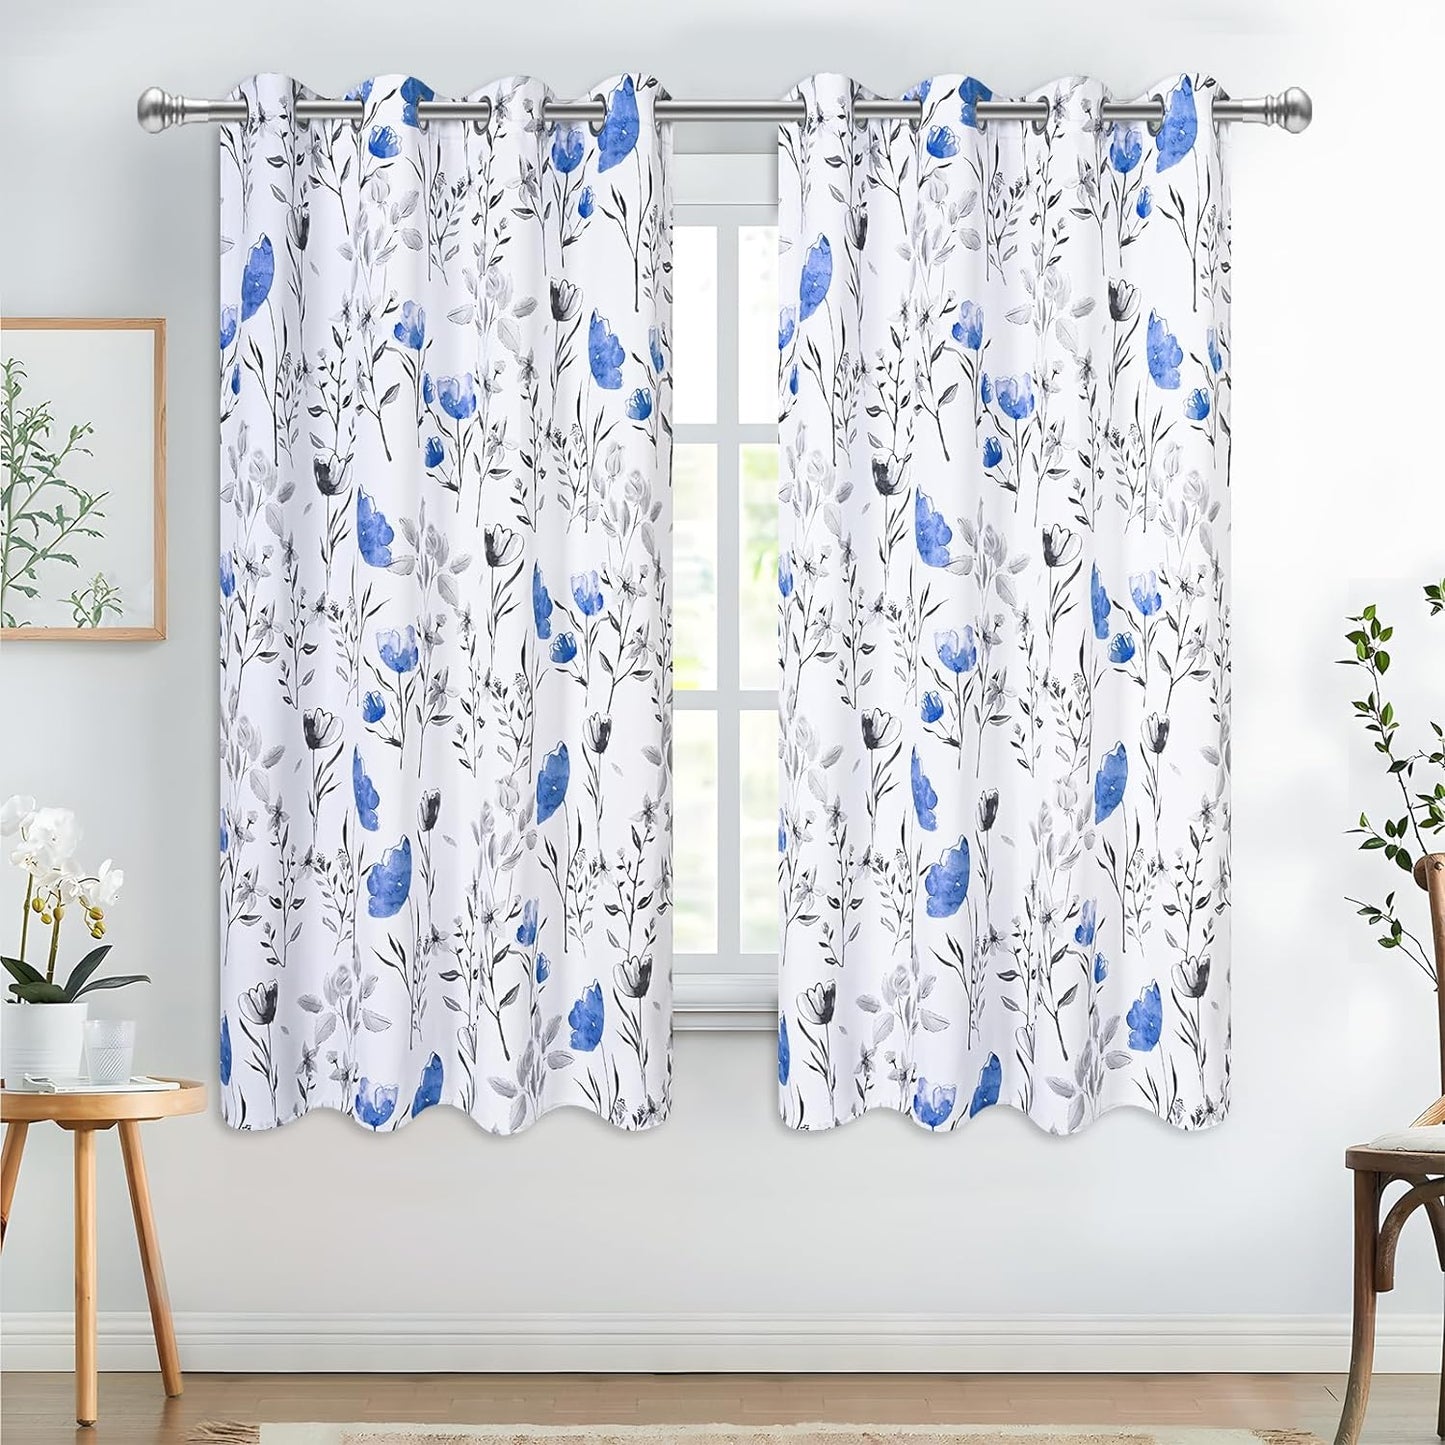 Likiyol Floral Kithchen Curtains 36 Inch Watercolor Flower Leaves Tier Curtains, Yellow and Gray Floral Cafe Curtains, Rod Pocket Small Window Curtain for Cafe Bathroom Bedroom Drapes  Likiyol Blue 63"L X 52"W 